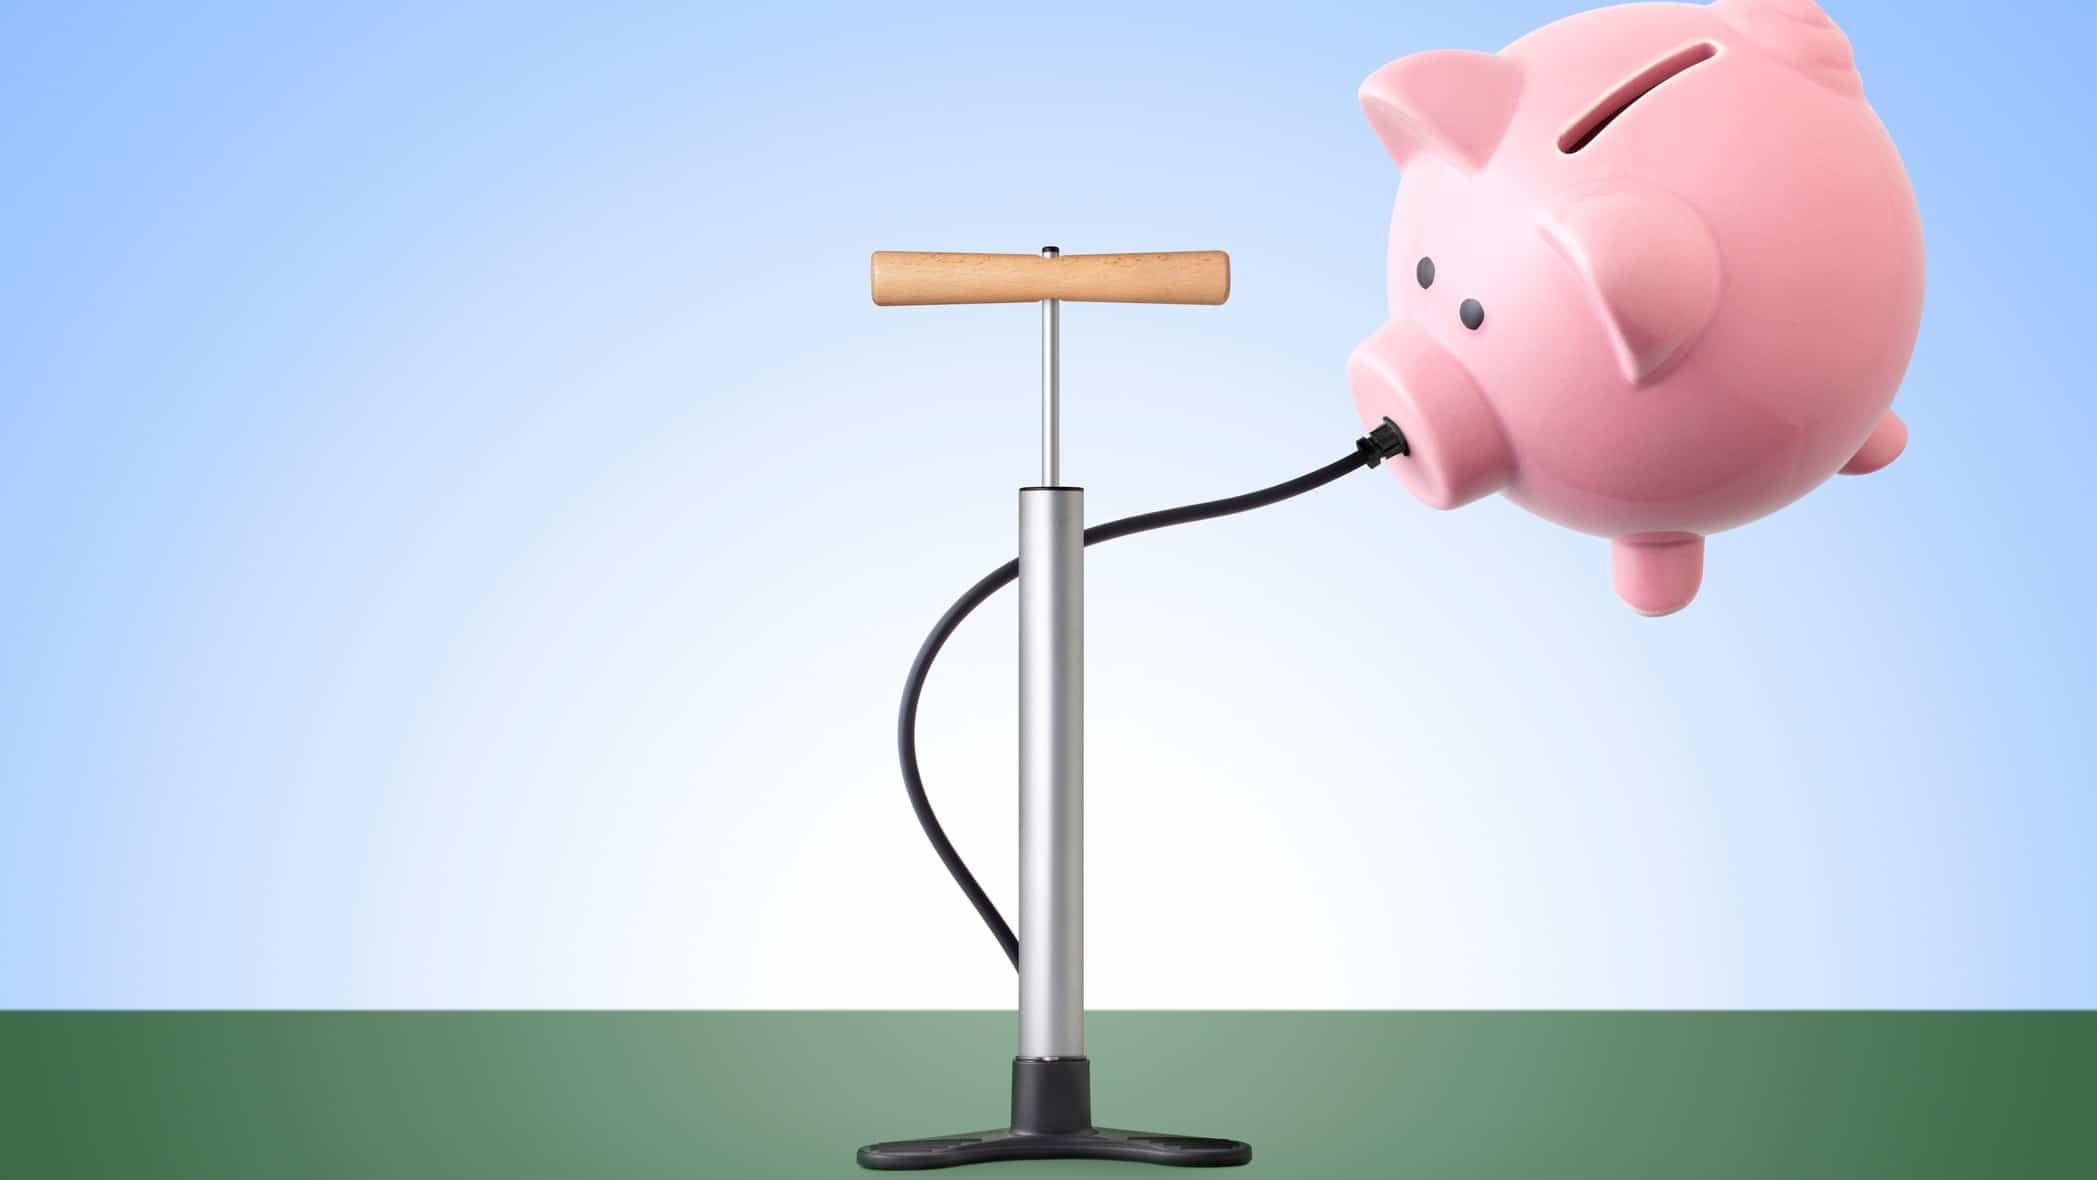 A piggy bank attached a bicycle pump floats up, indicating rising inflation